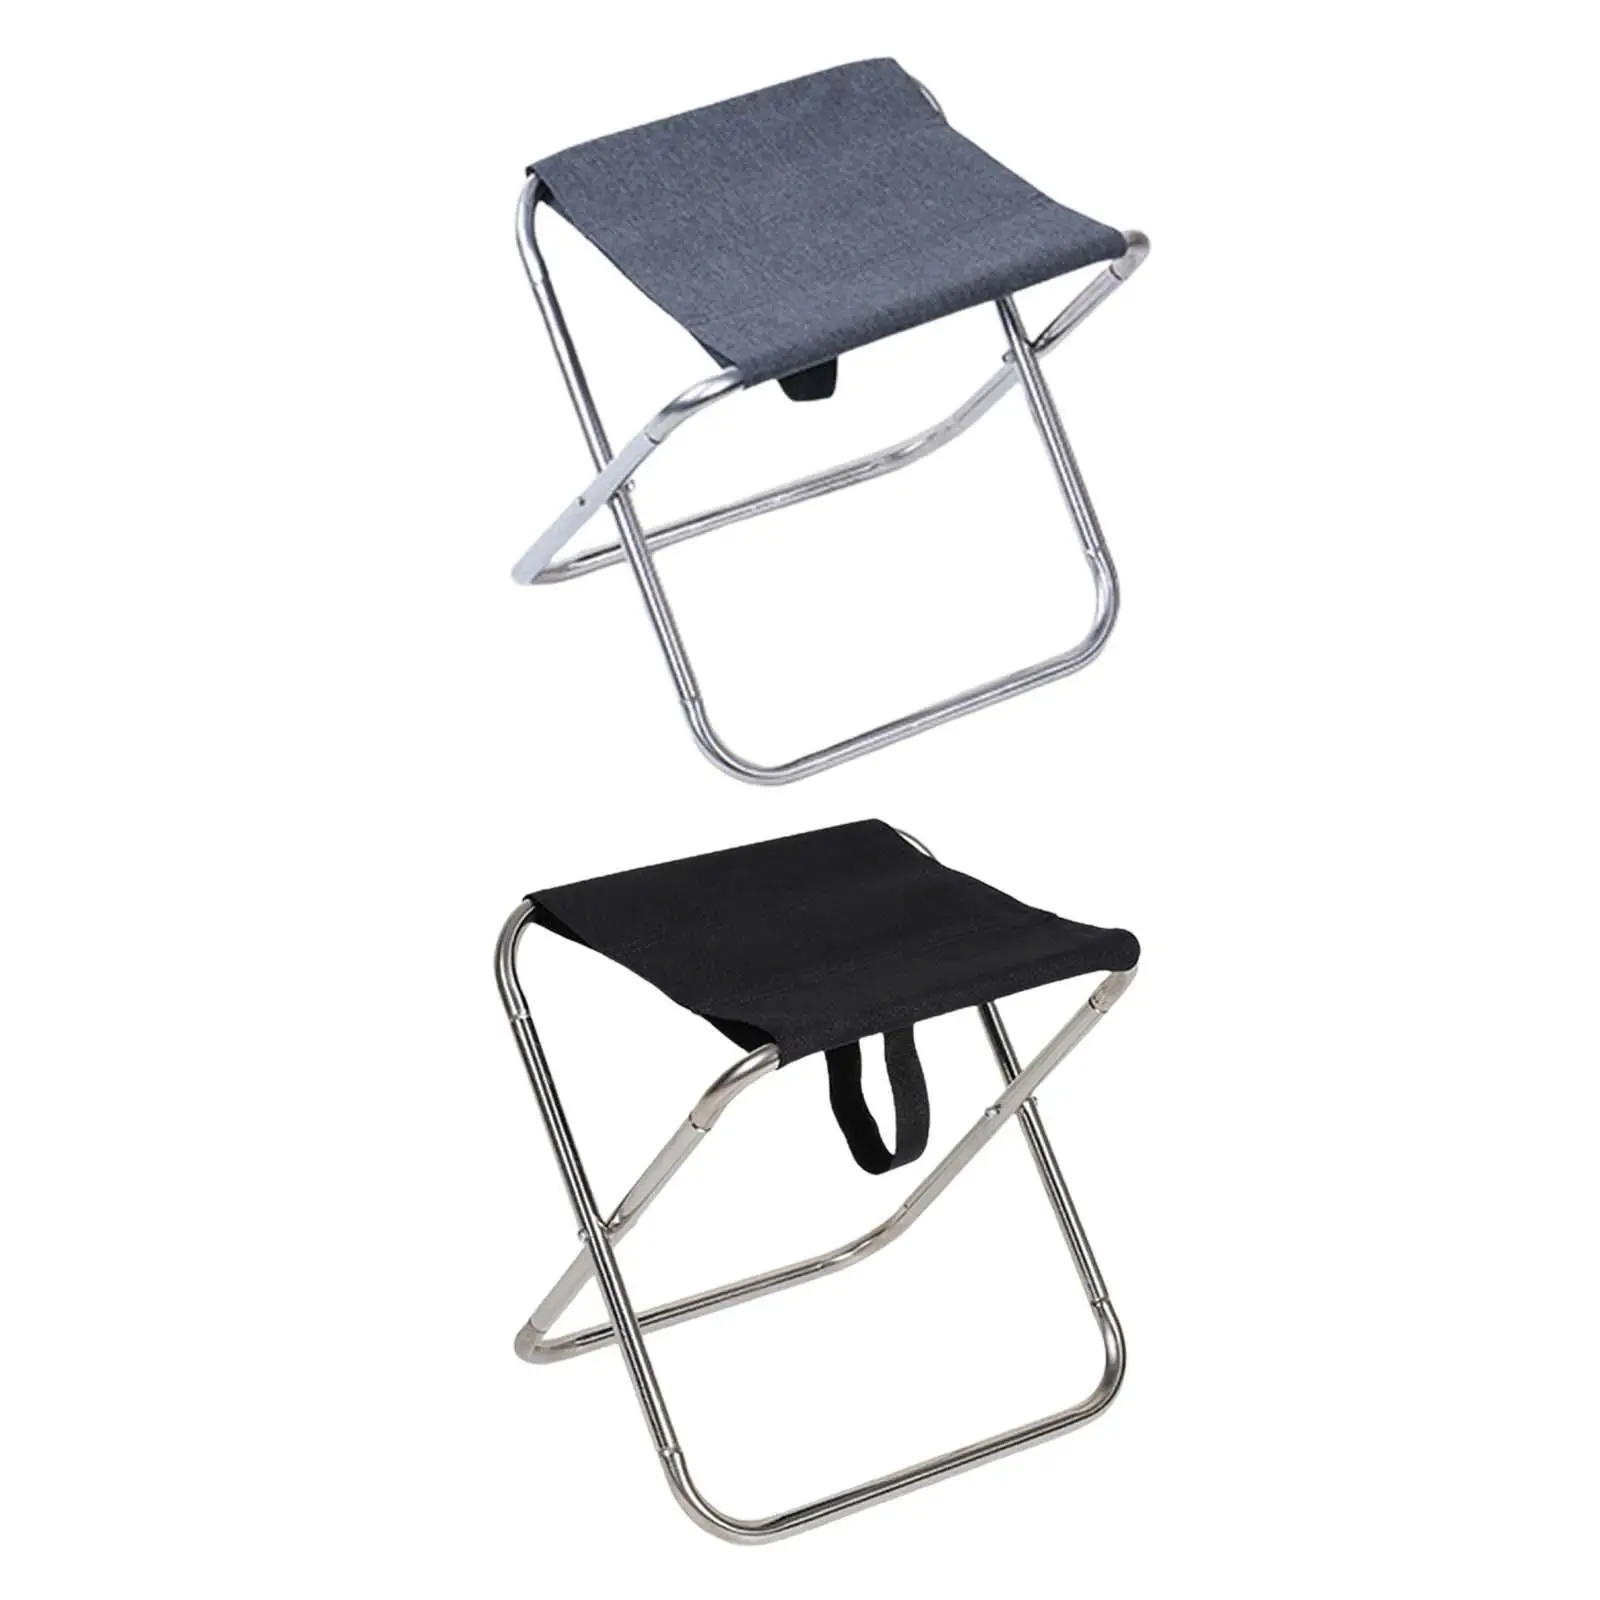 Folding Stool Camping Outdoor Reusable Fishing Seat Mini Camping Seat Adults Saddle Chair for Park Lawn Festival Patio